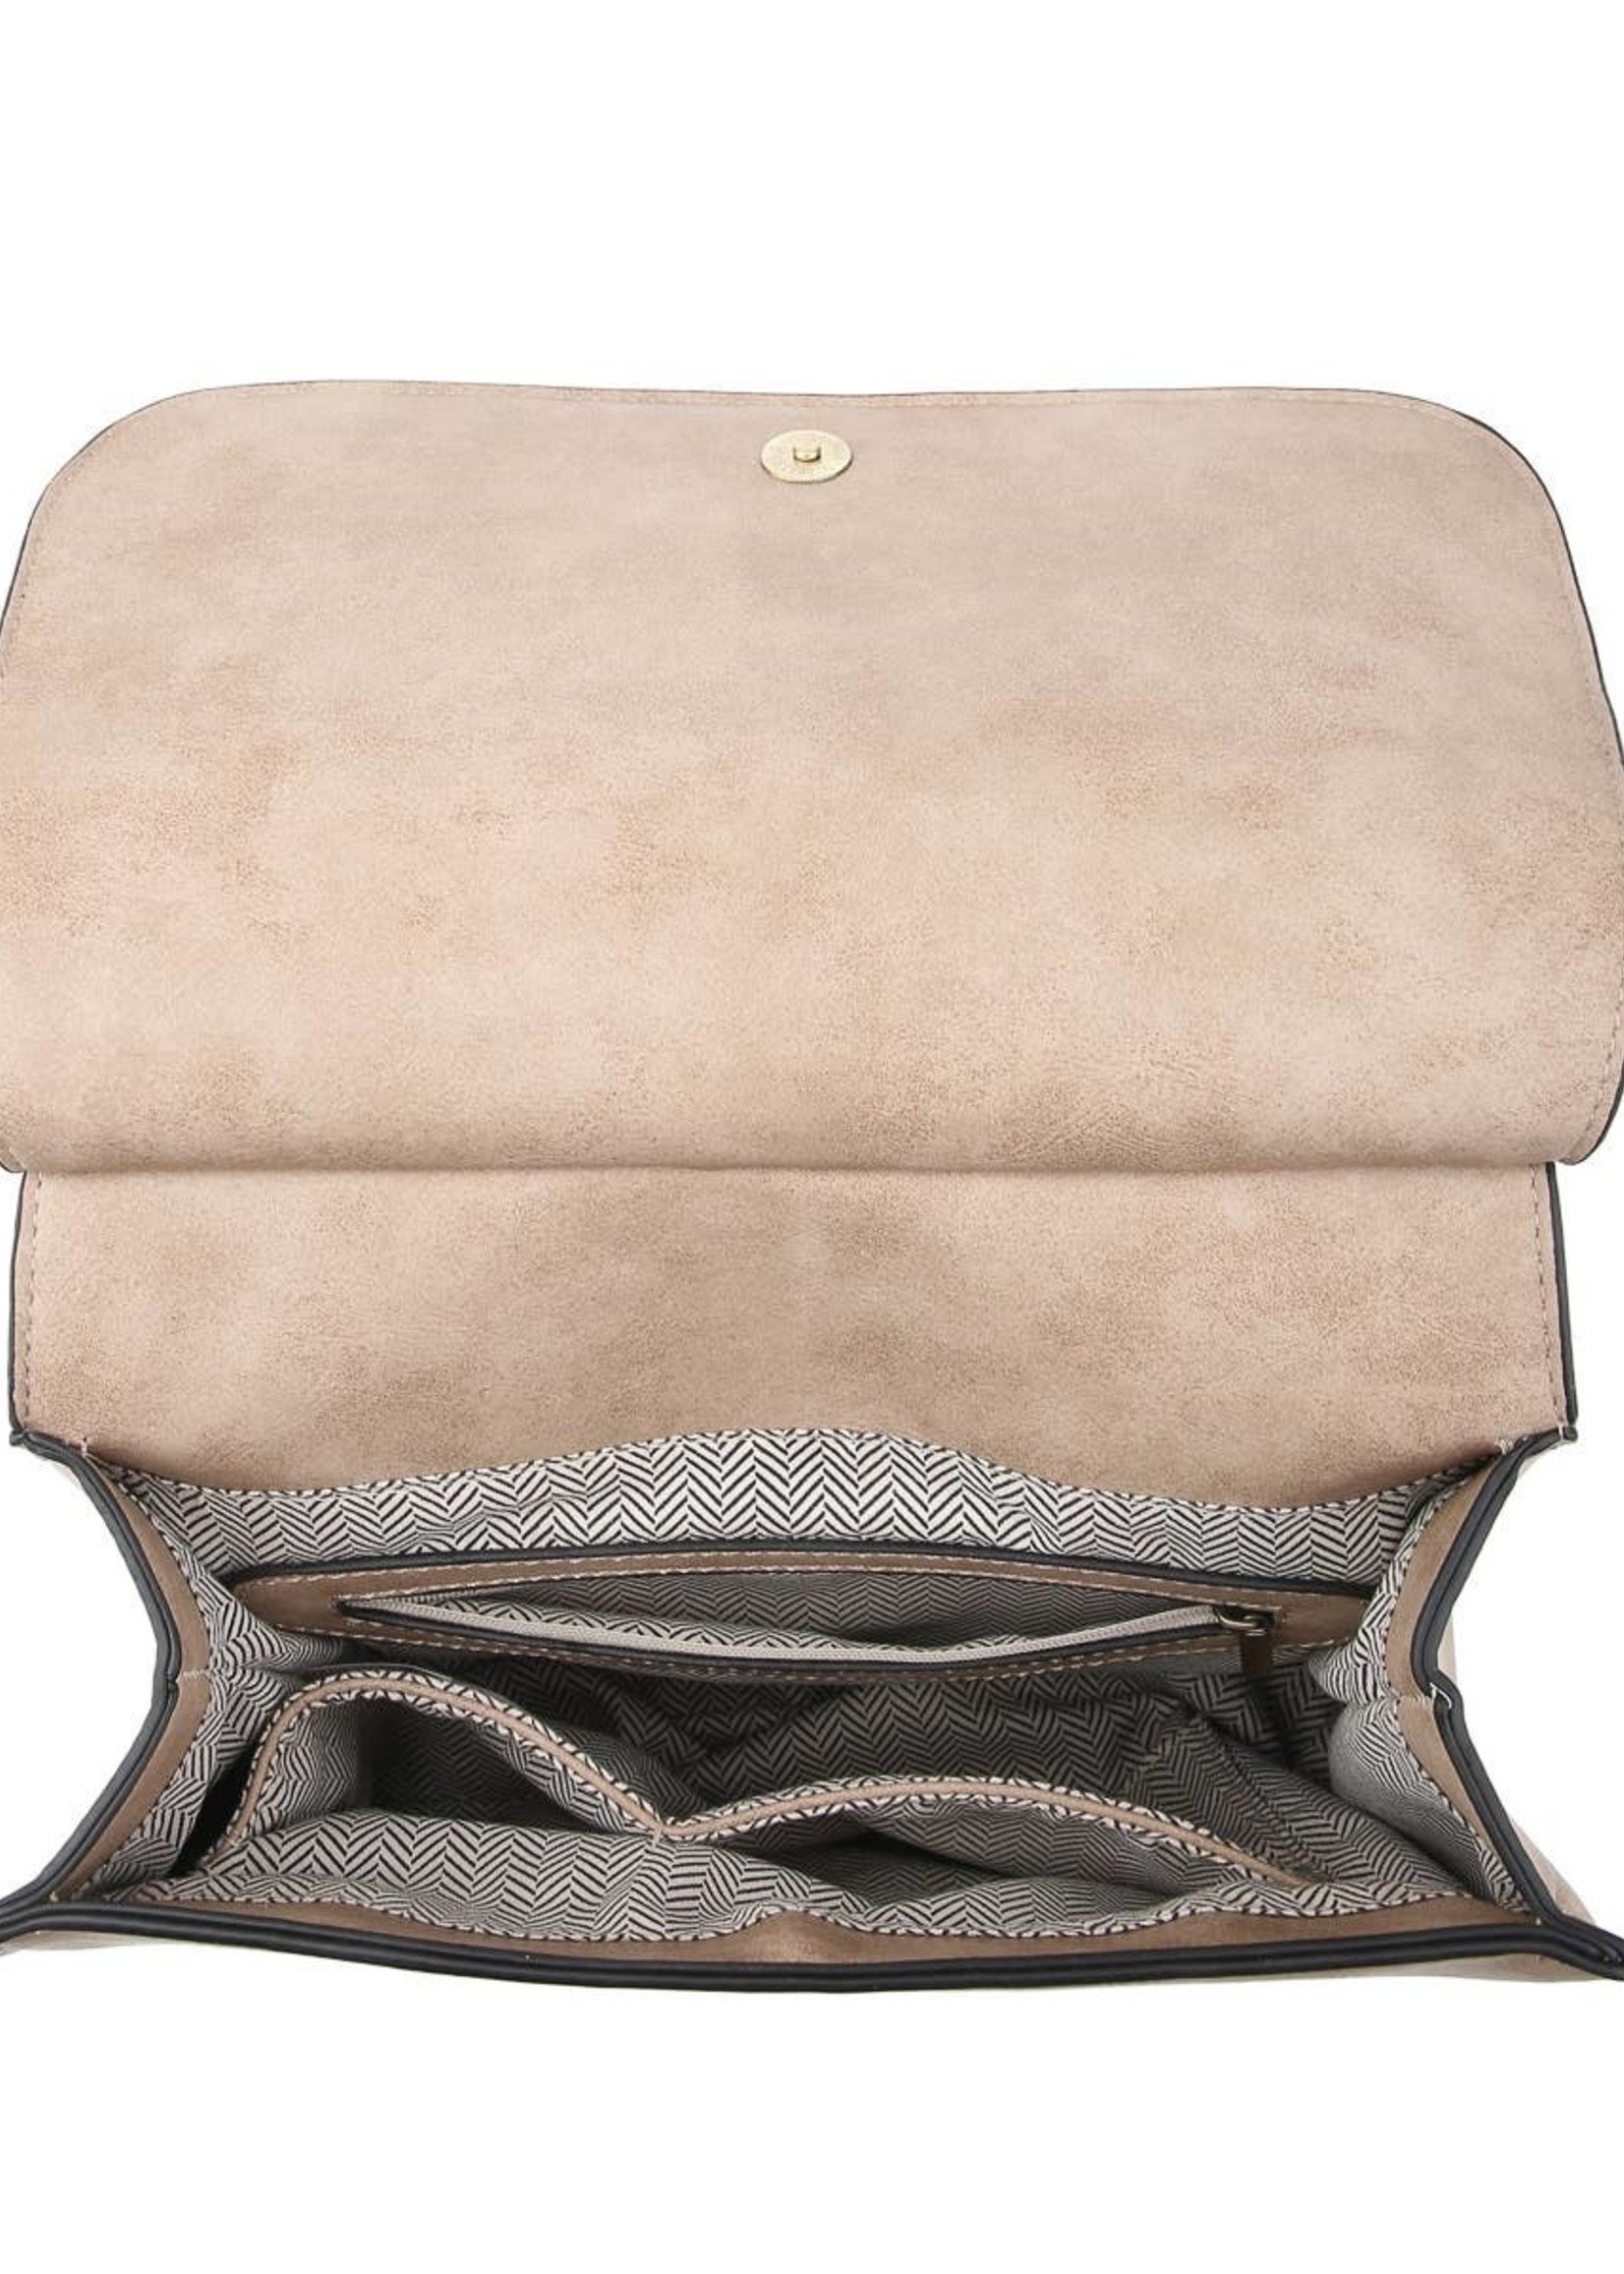 Bailey Crossbody With Print Strap - Olive